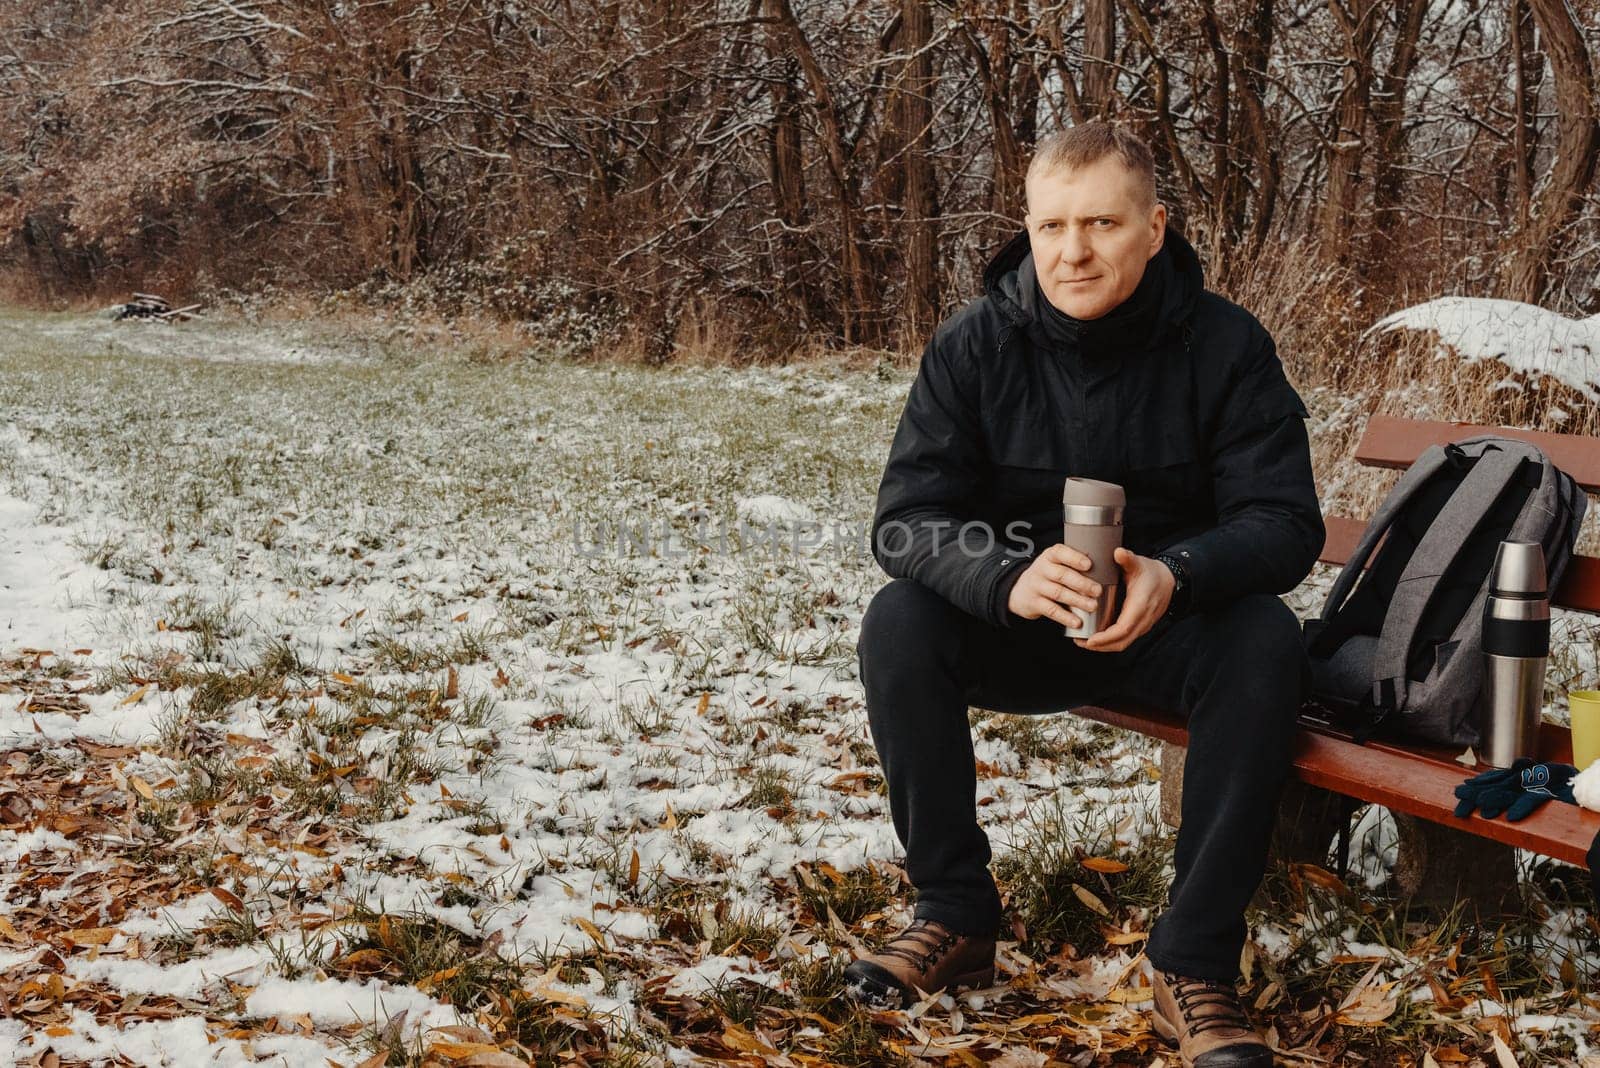 Winter Serenity: 40-Year-Old Man Enjoying Tea on Snow-Covered Bench in Rural Park. Immerse yourself in the tranquil beauty of winter as a 40-year-old man finds solace on a snowy bench in a rural park. Sipping hot tea from a thermos, he embraces the serene ambiance, surrounded by the peaceful, snow-covered nature. This captivating image captures the essence of winter leisure, offering a moment of seasonal joy and quiet contemplation amidst the breathtaking scenery.